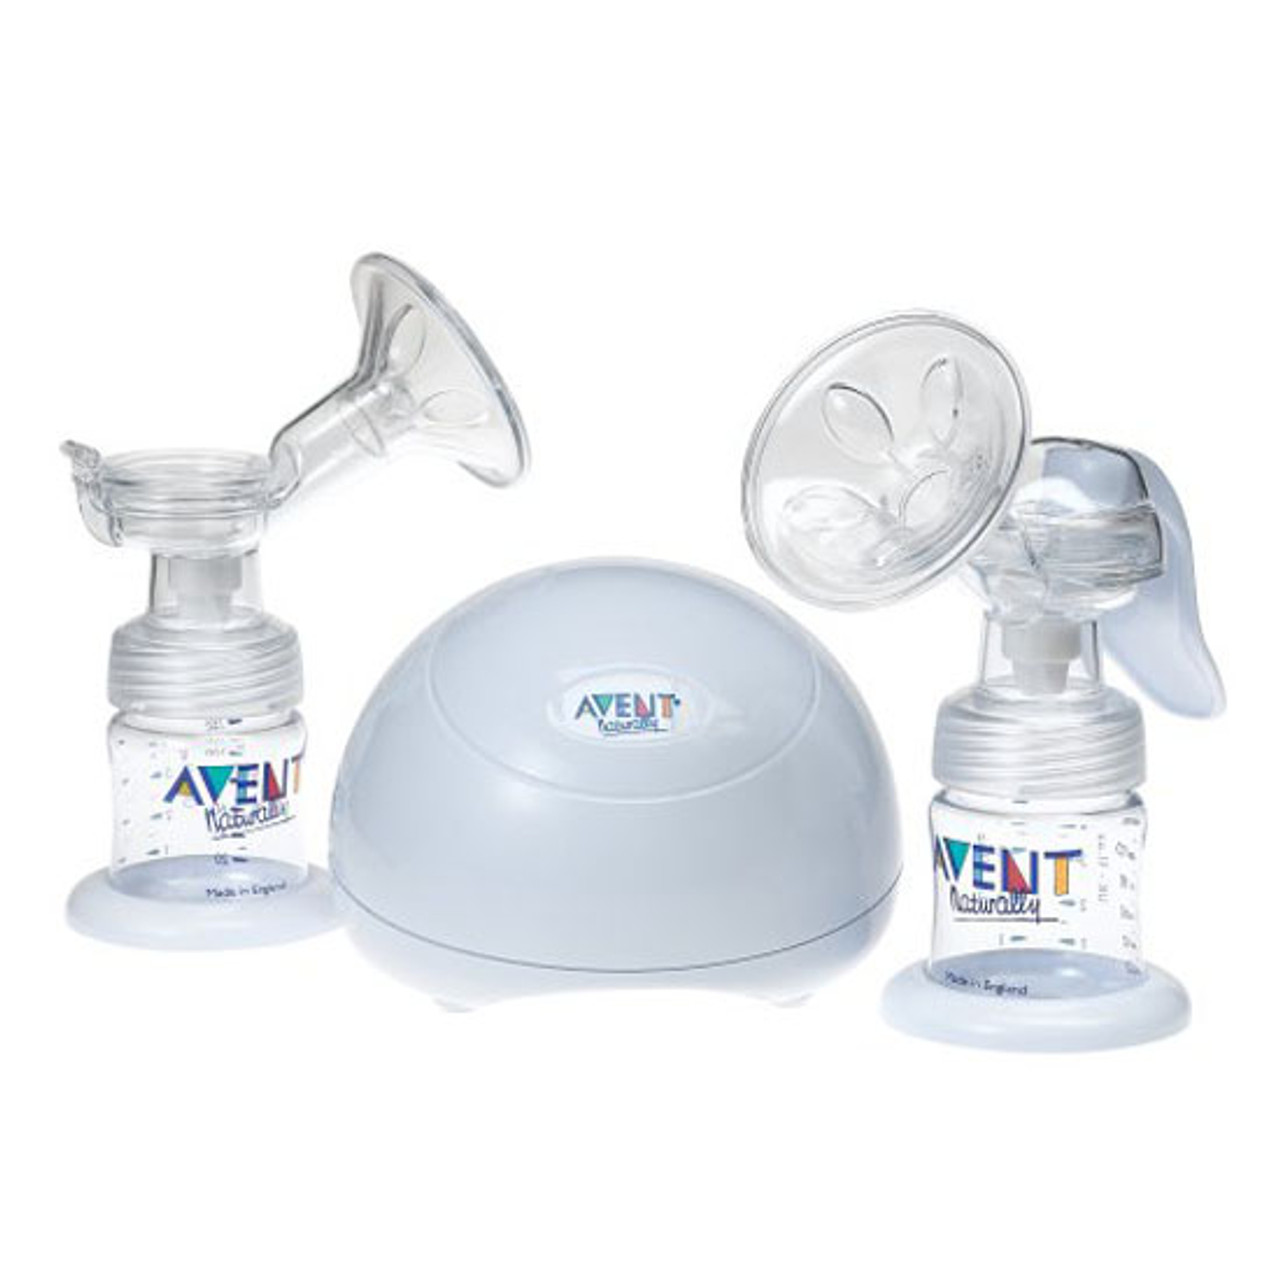 Roux Schema passend Philips Avent Isis iQ Duo Twin Electronic Breast Pump | Kidsland